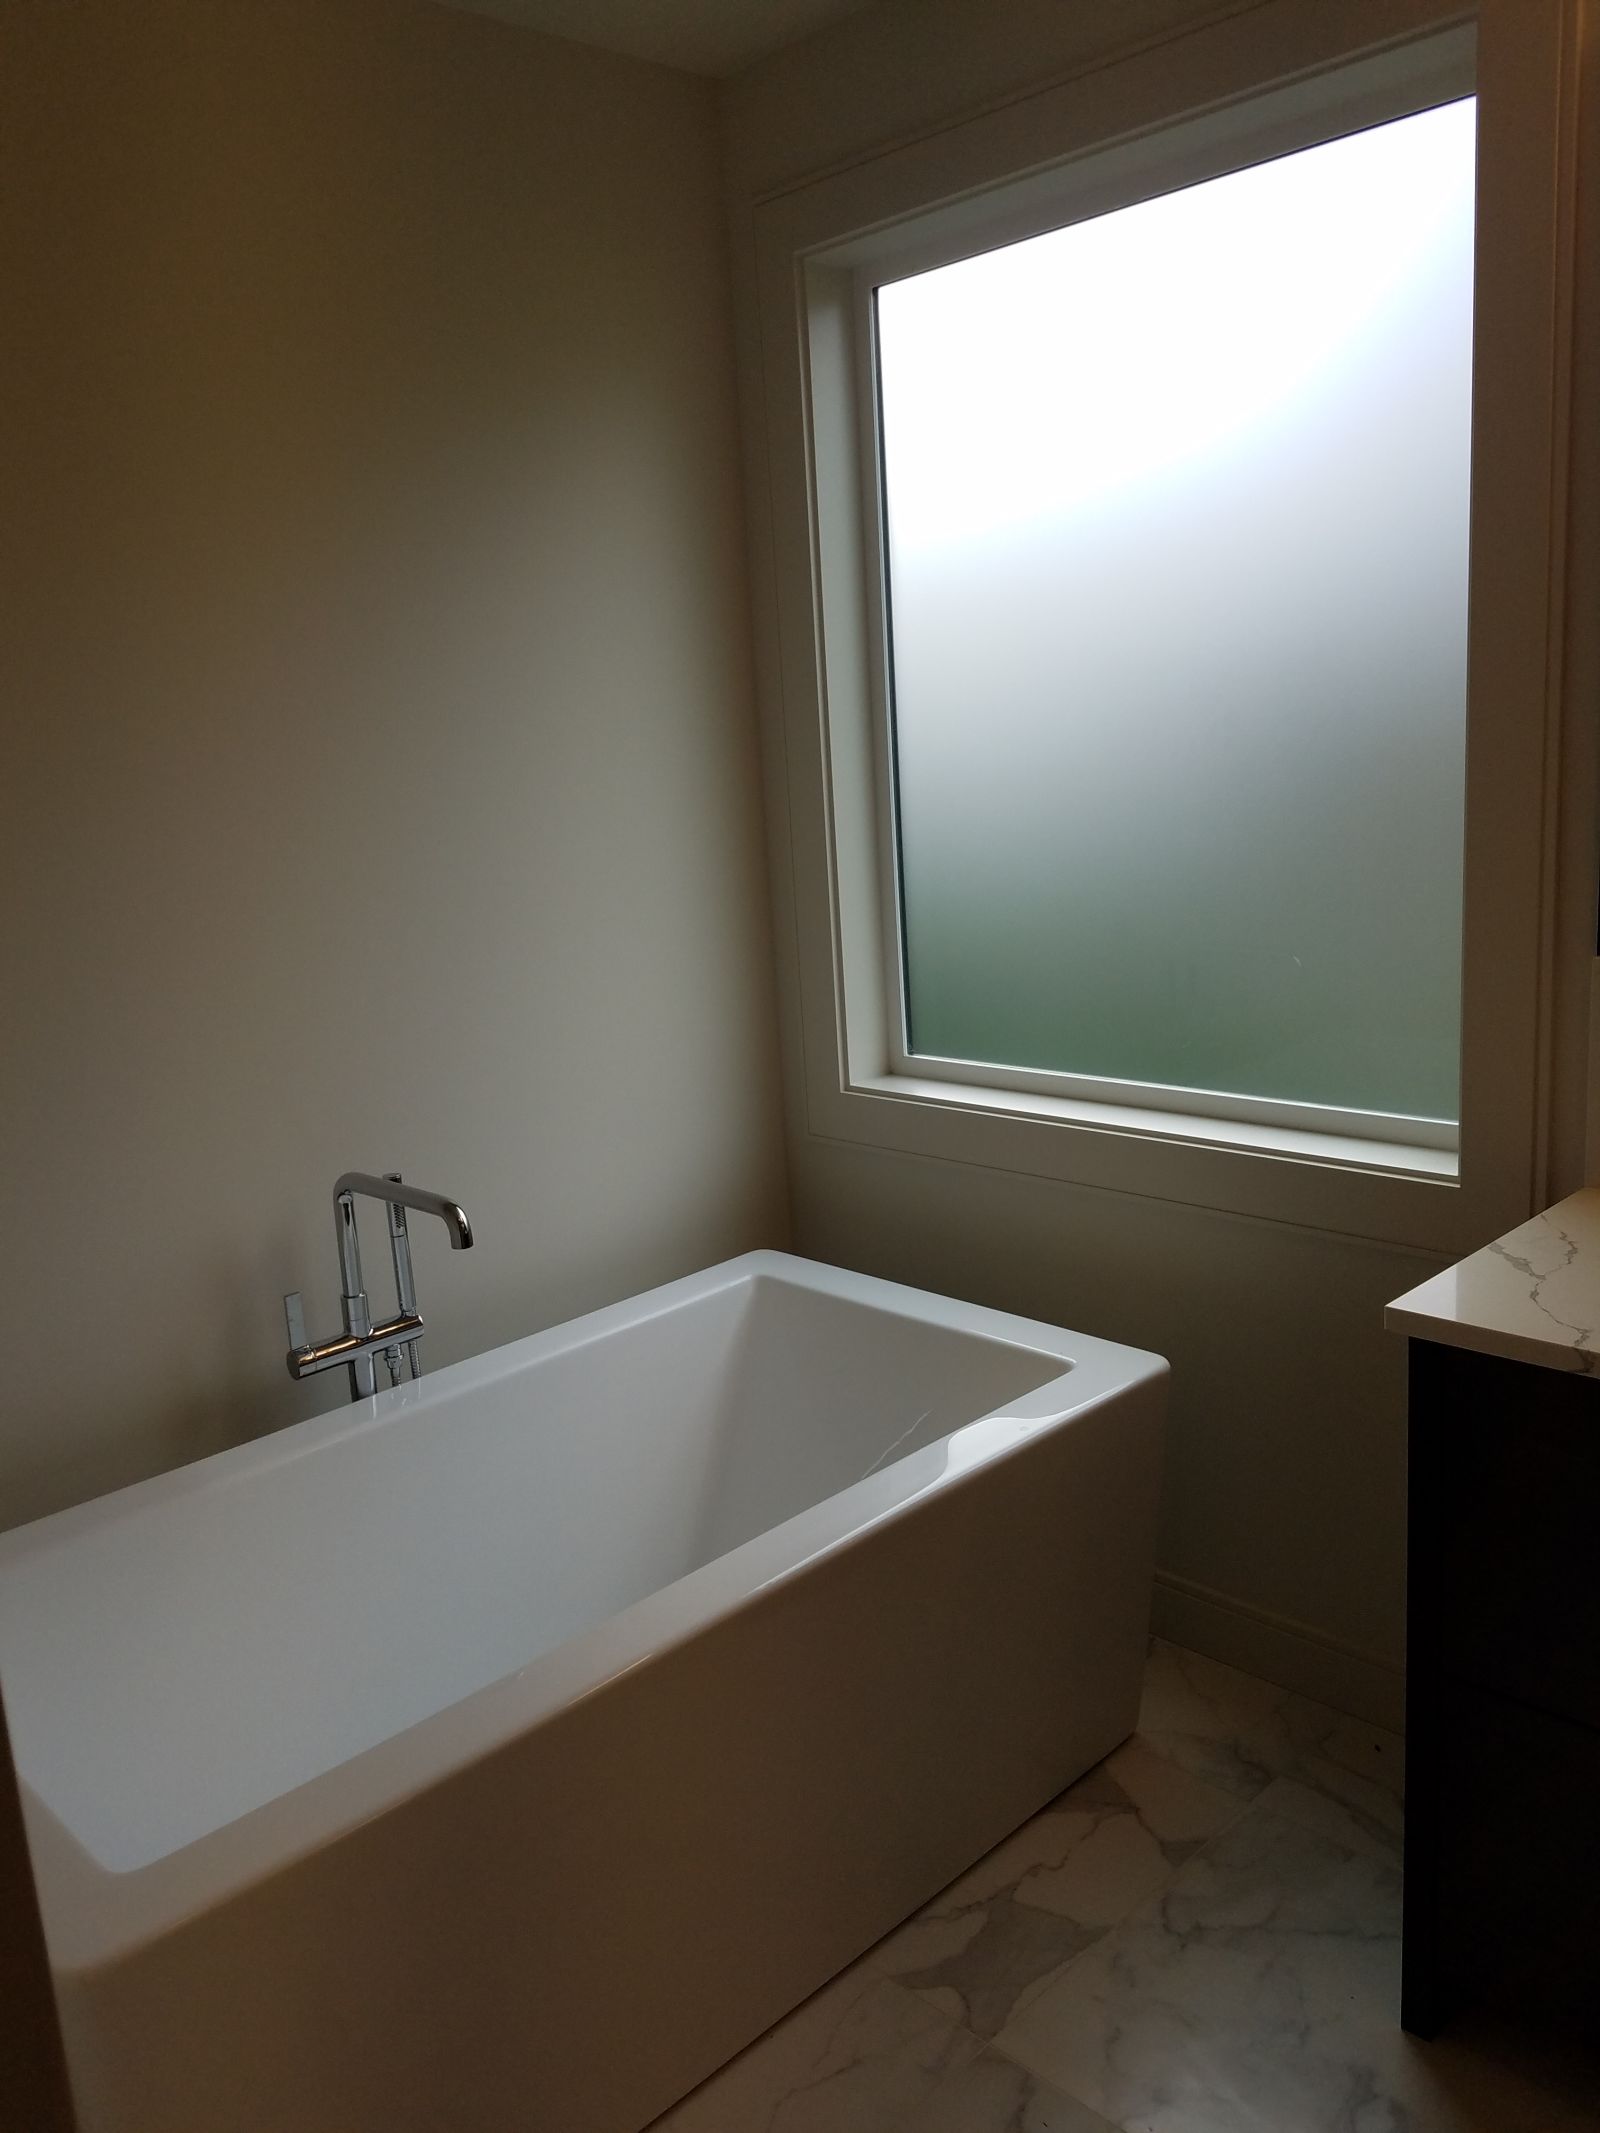 Yes folks, they actually sprang for frosted glass so you can walk around naked in your bathroom in peace.